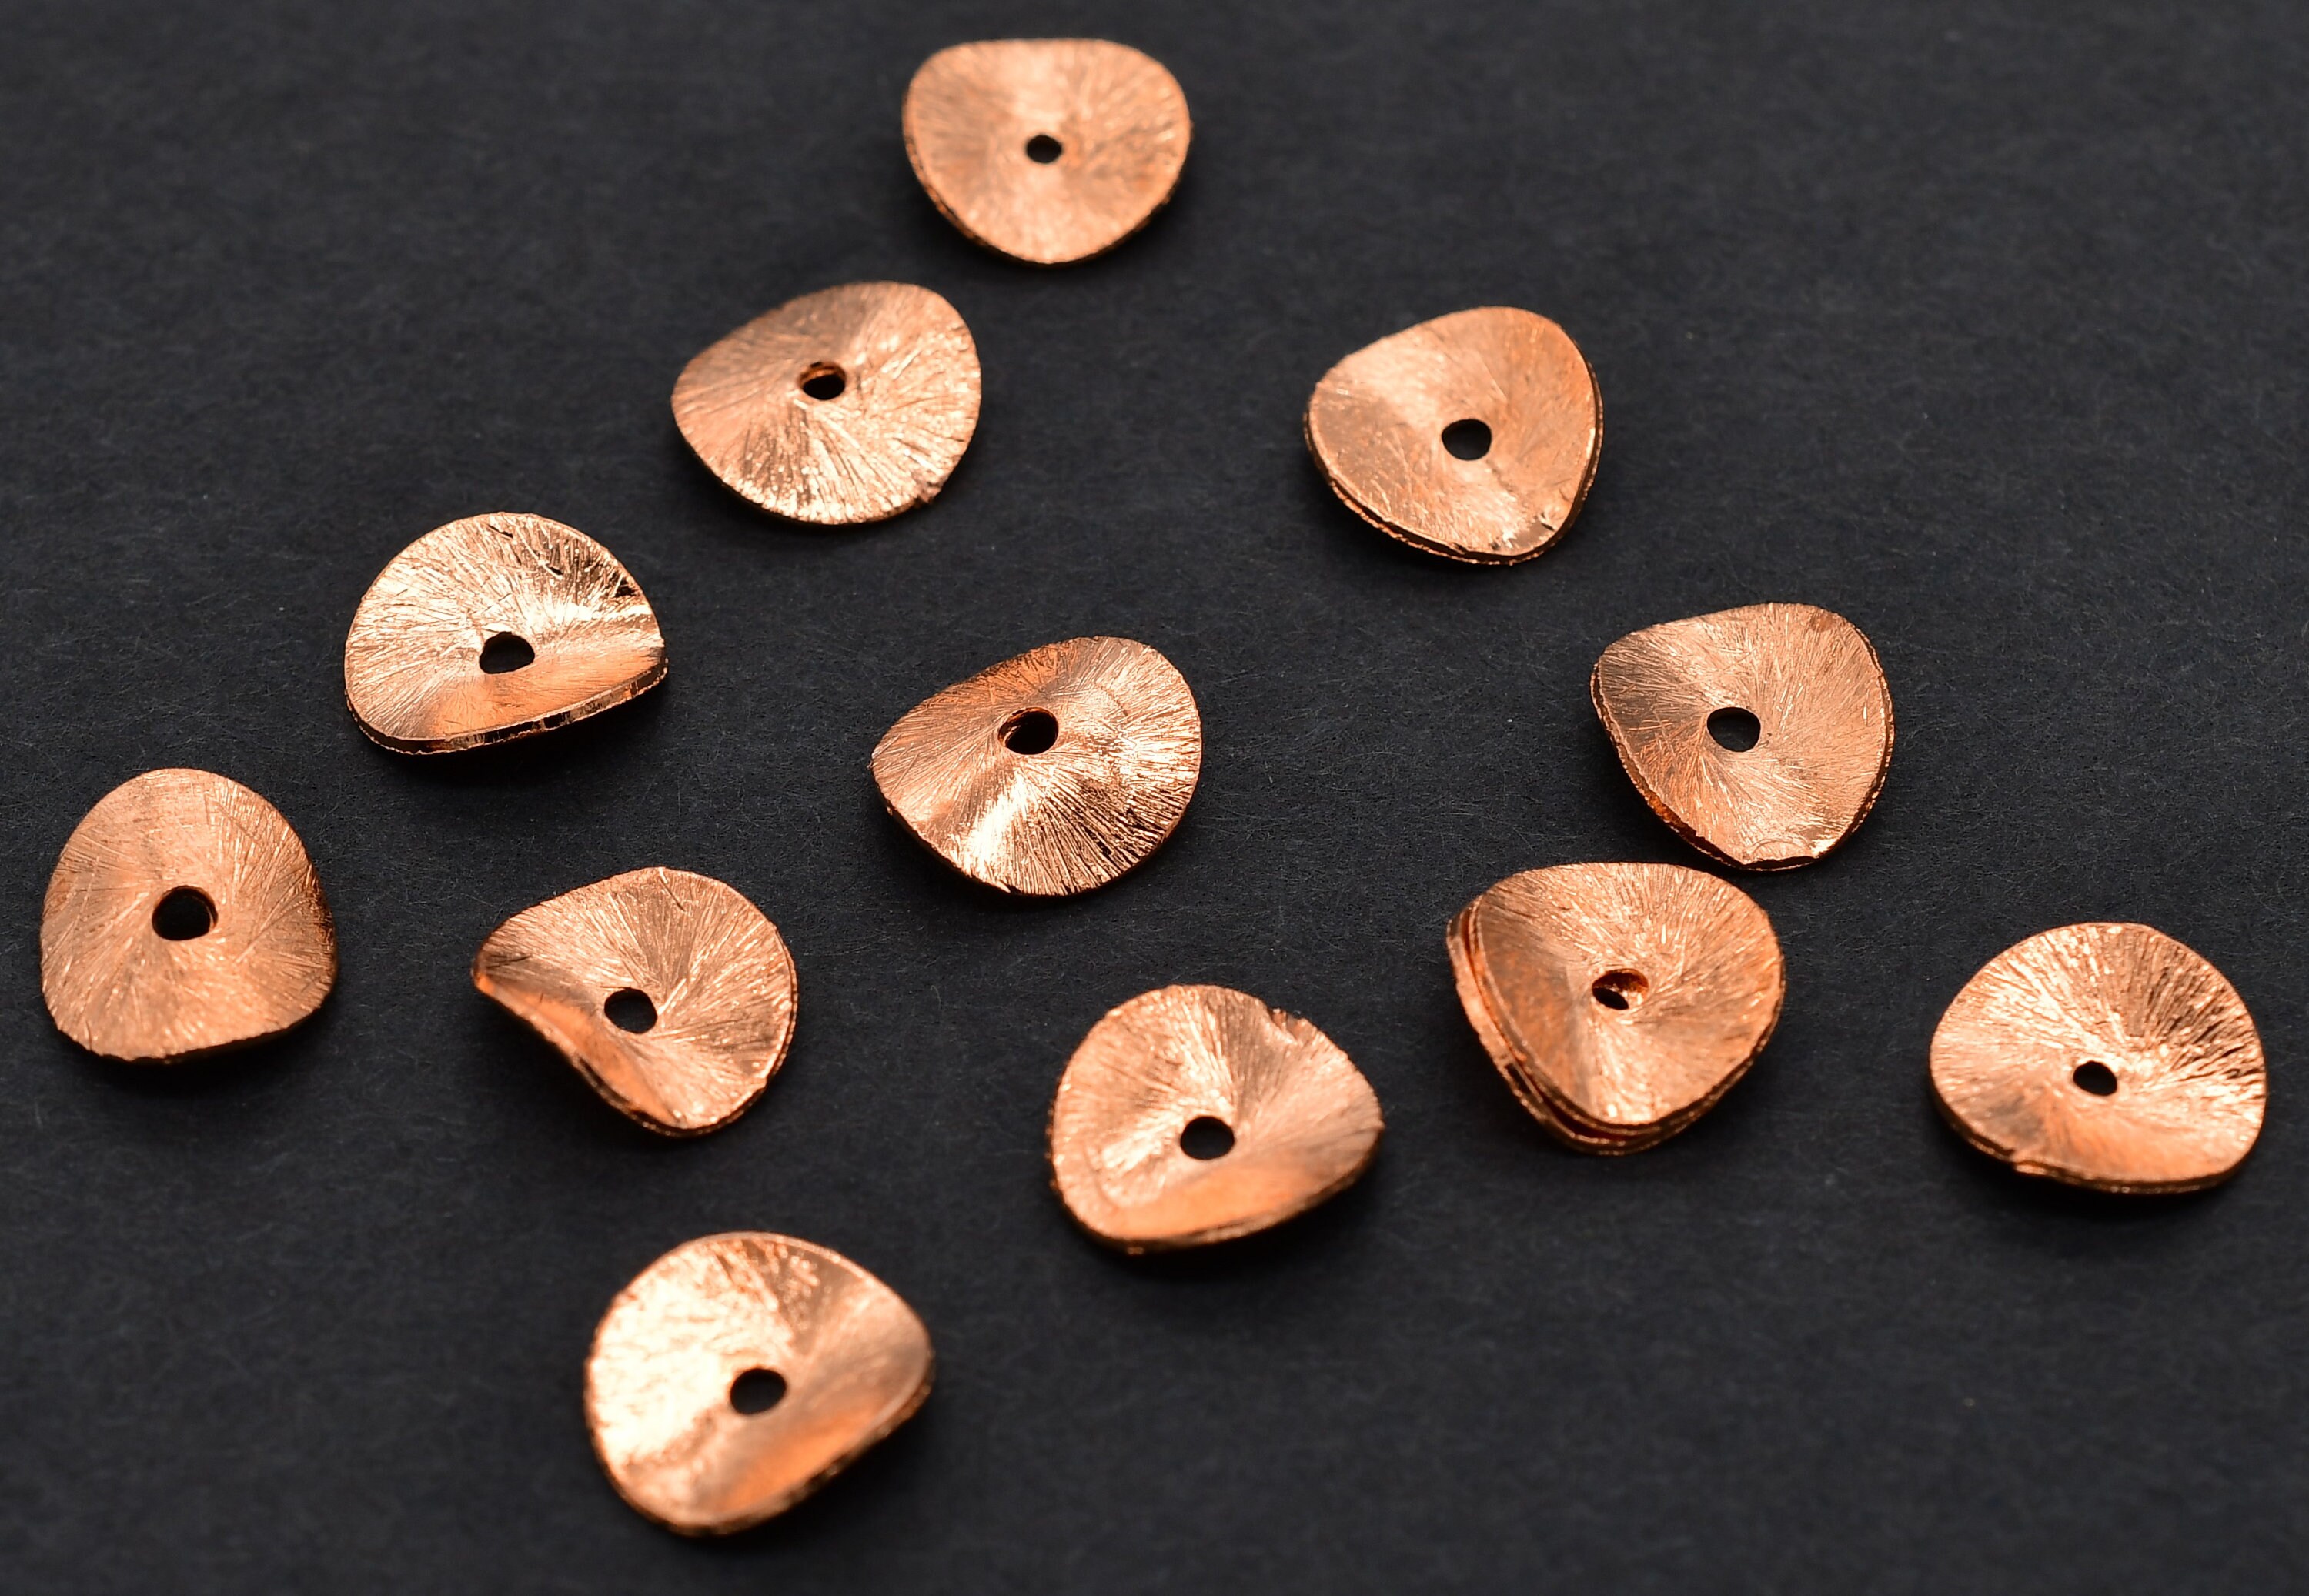 Copper Beads 8mm - 38pcs Flat copper disc spacers, brushed finish shiny  copper disk spacer beads for jewelry making, Copper Heishi Beads